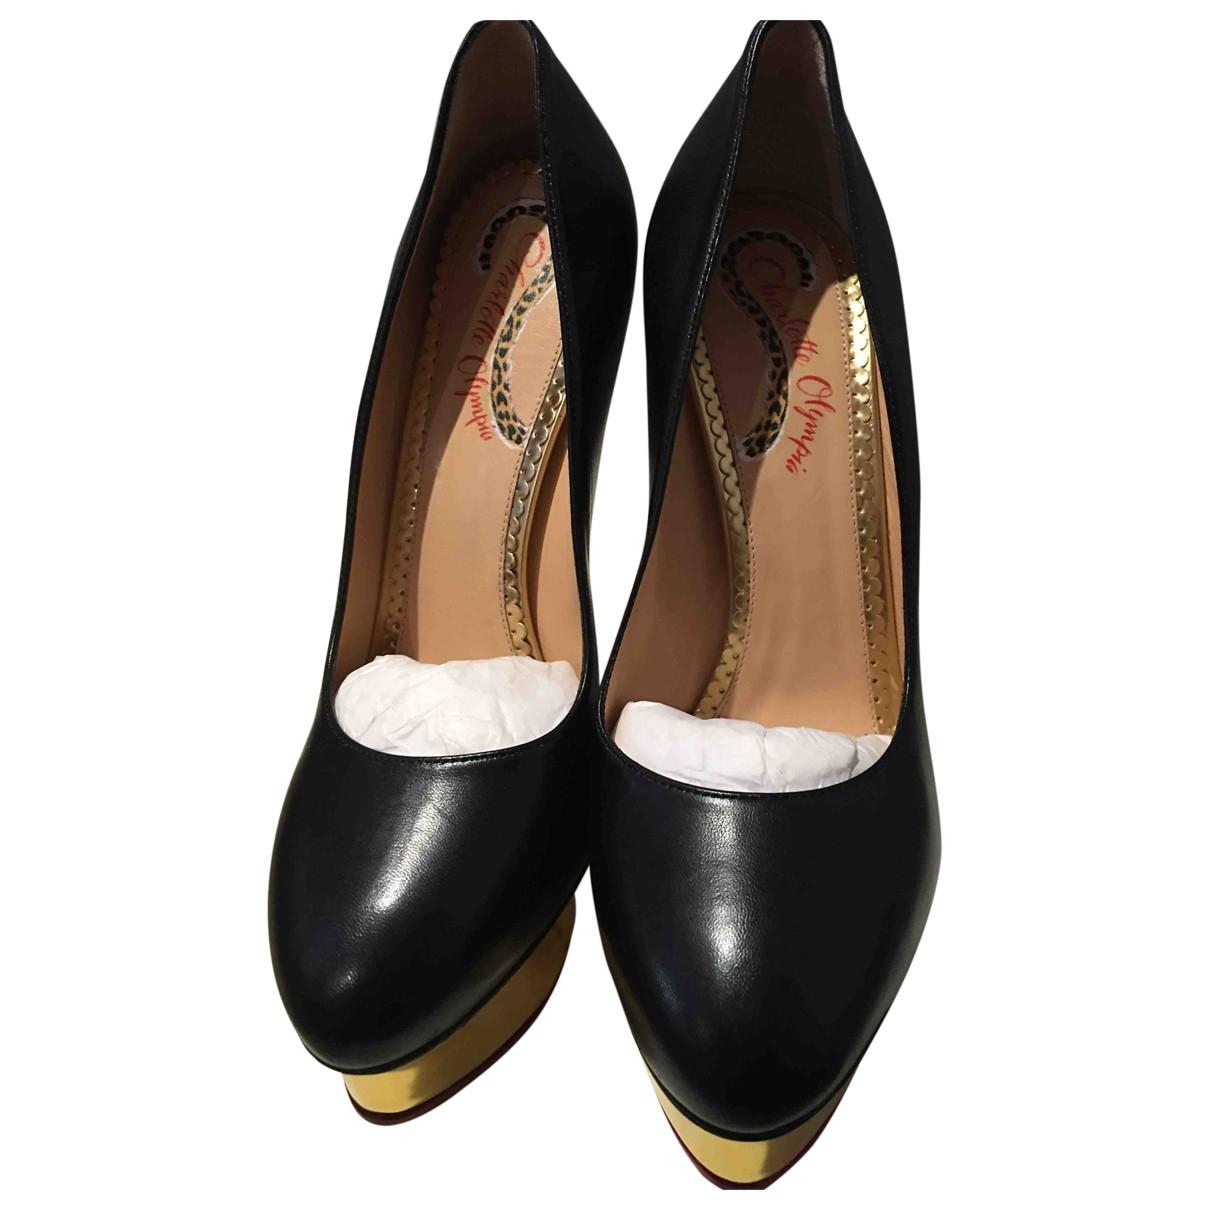 Charlotte Olympia Dolly Leather Heels in Black - Lyst